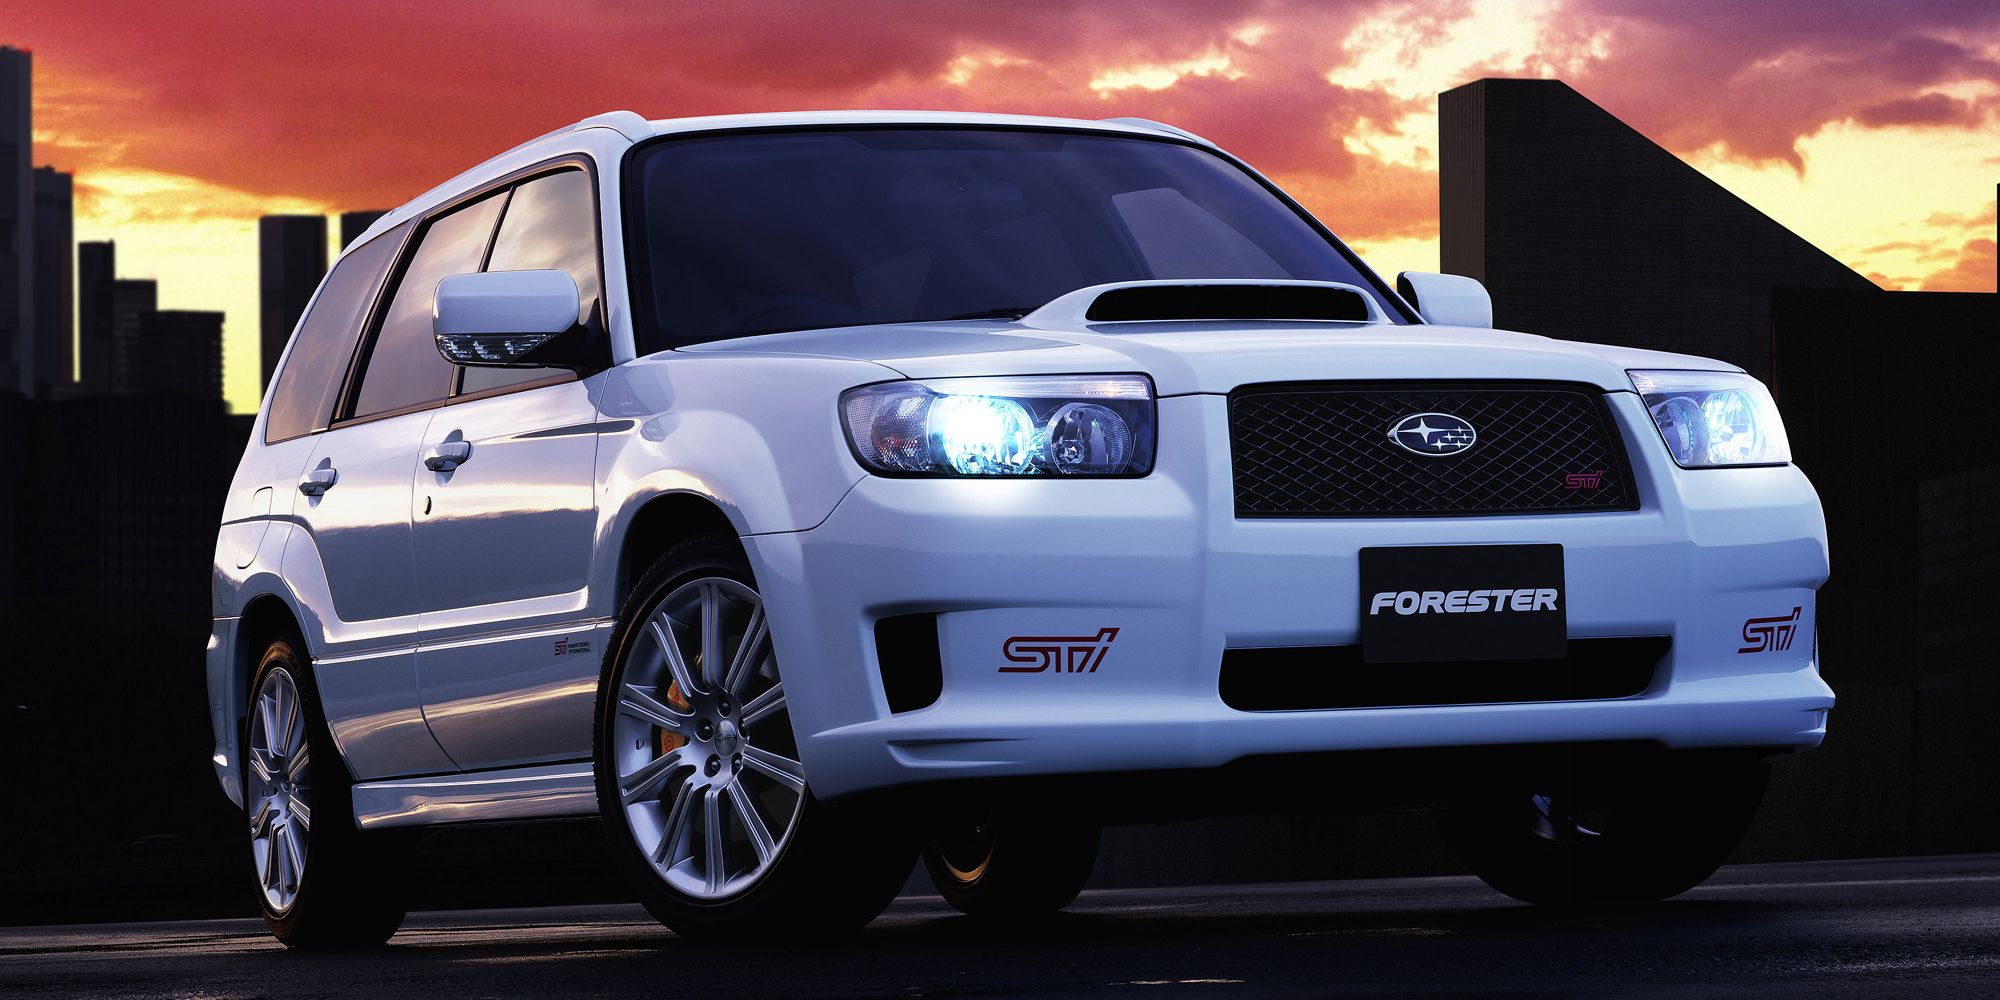 The front of a Forester STI